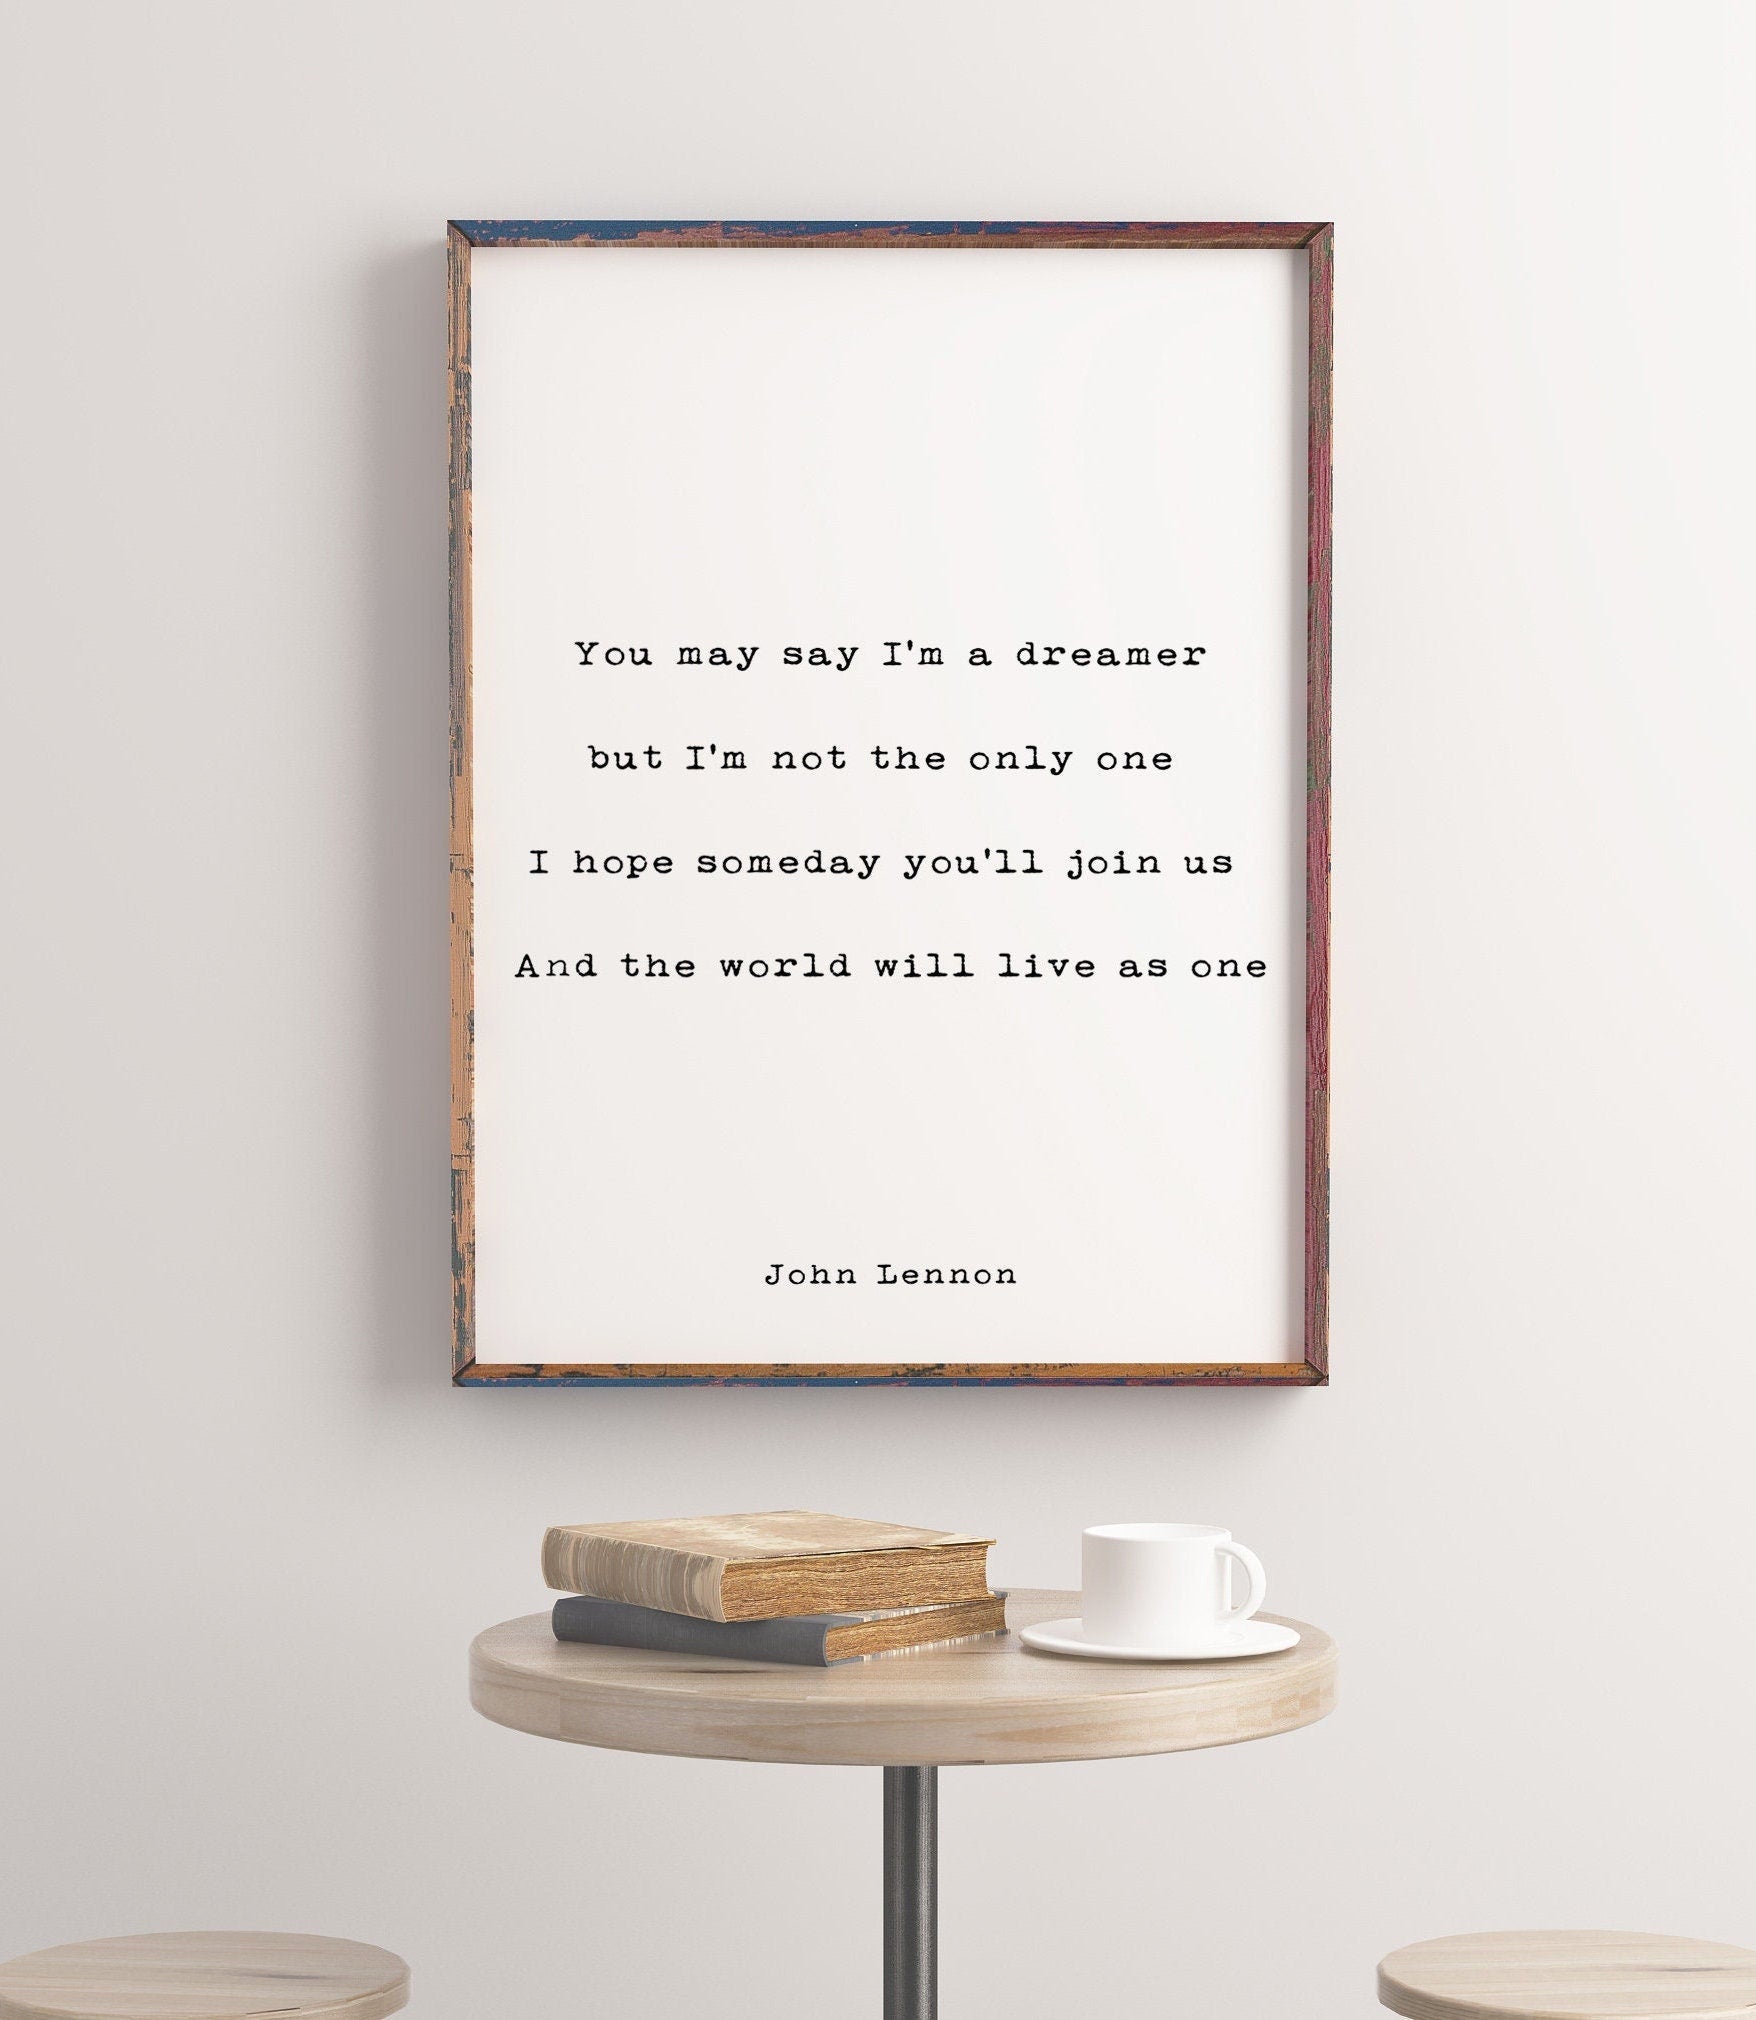 John Lennon Quote Print, You may say I'm a dreamer